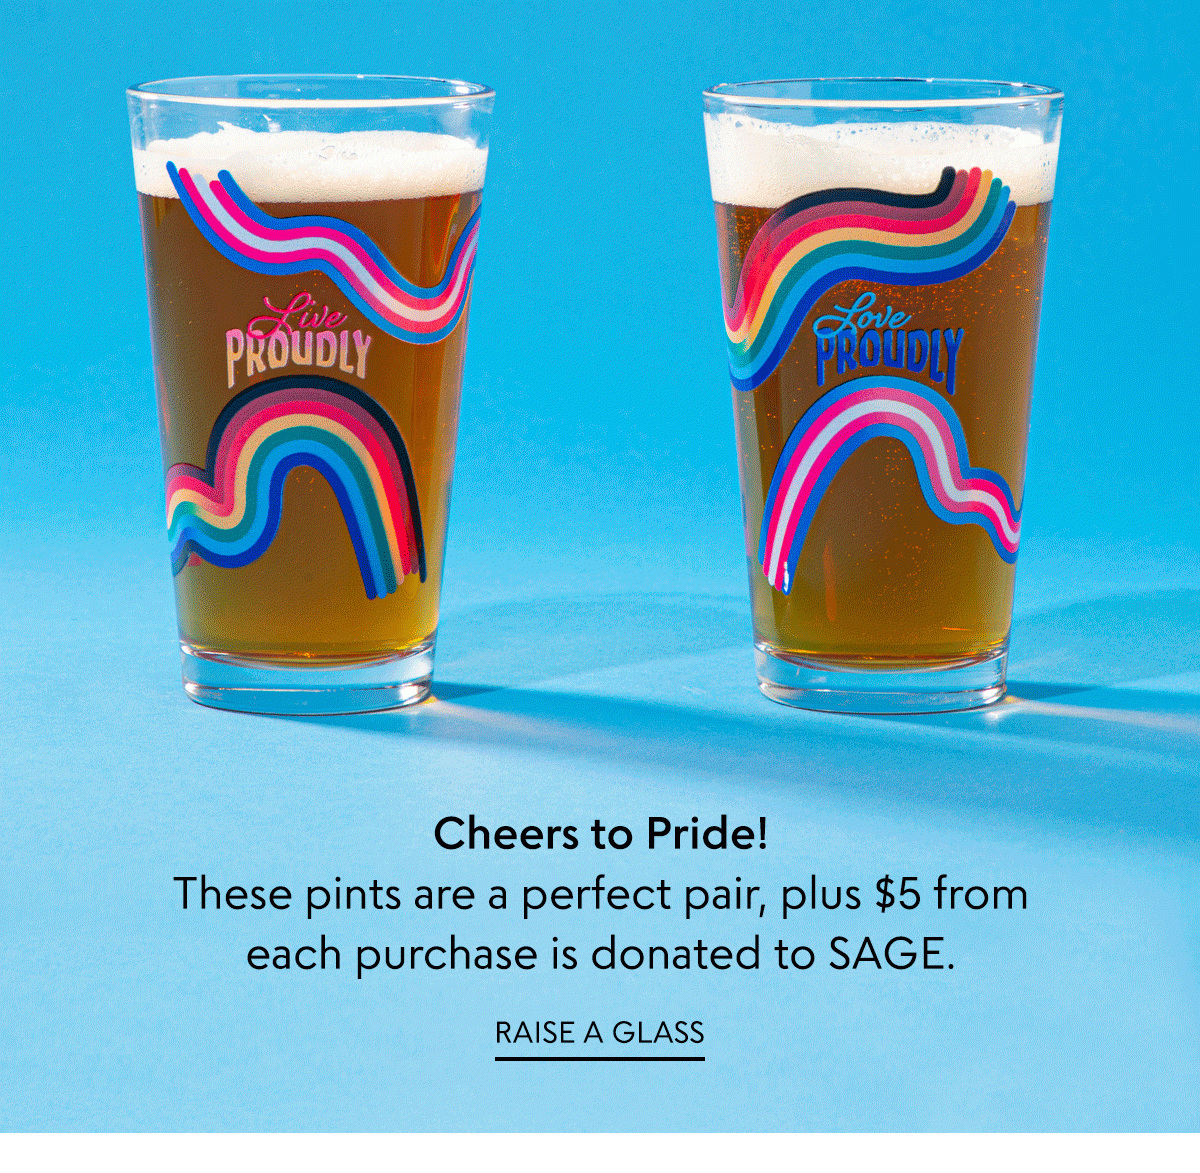 Cheers to Pride! The Live Proudly Glasses are a perfect pair, plus $5 of each sale is donated to SAGE.